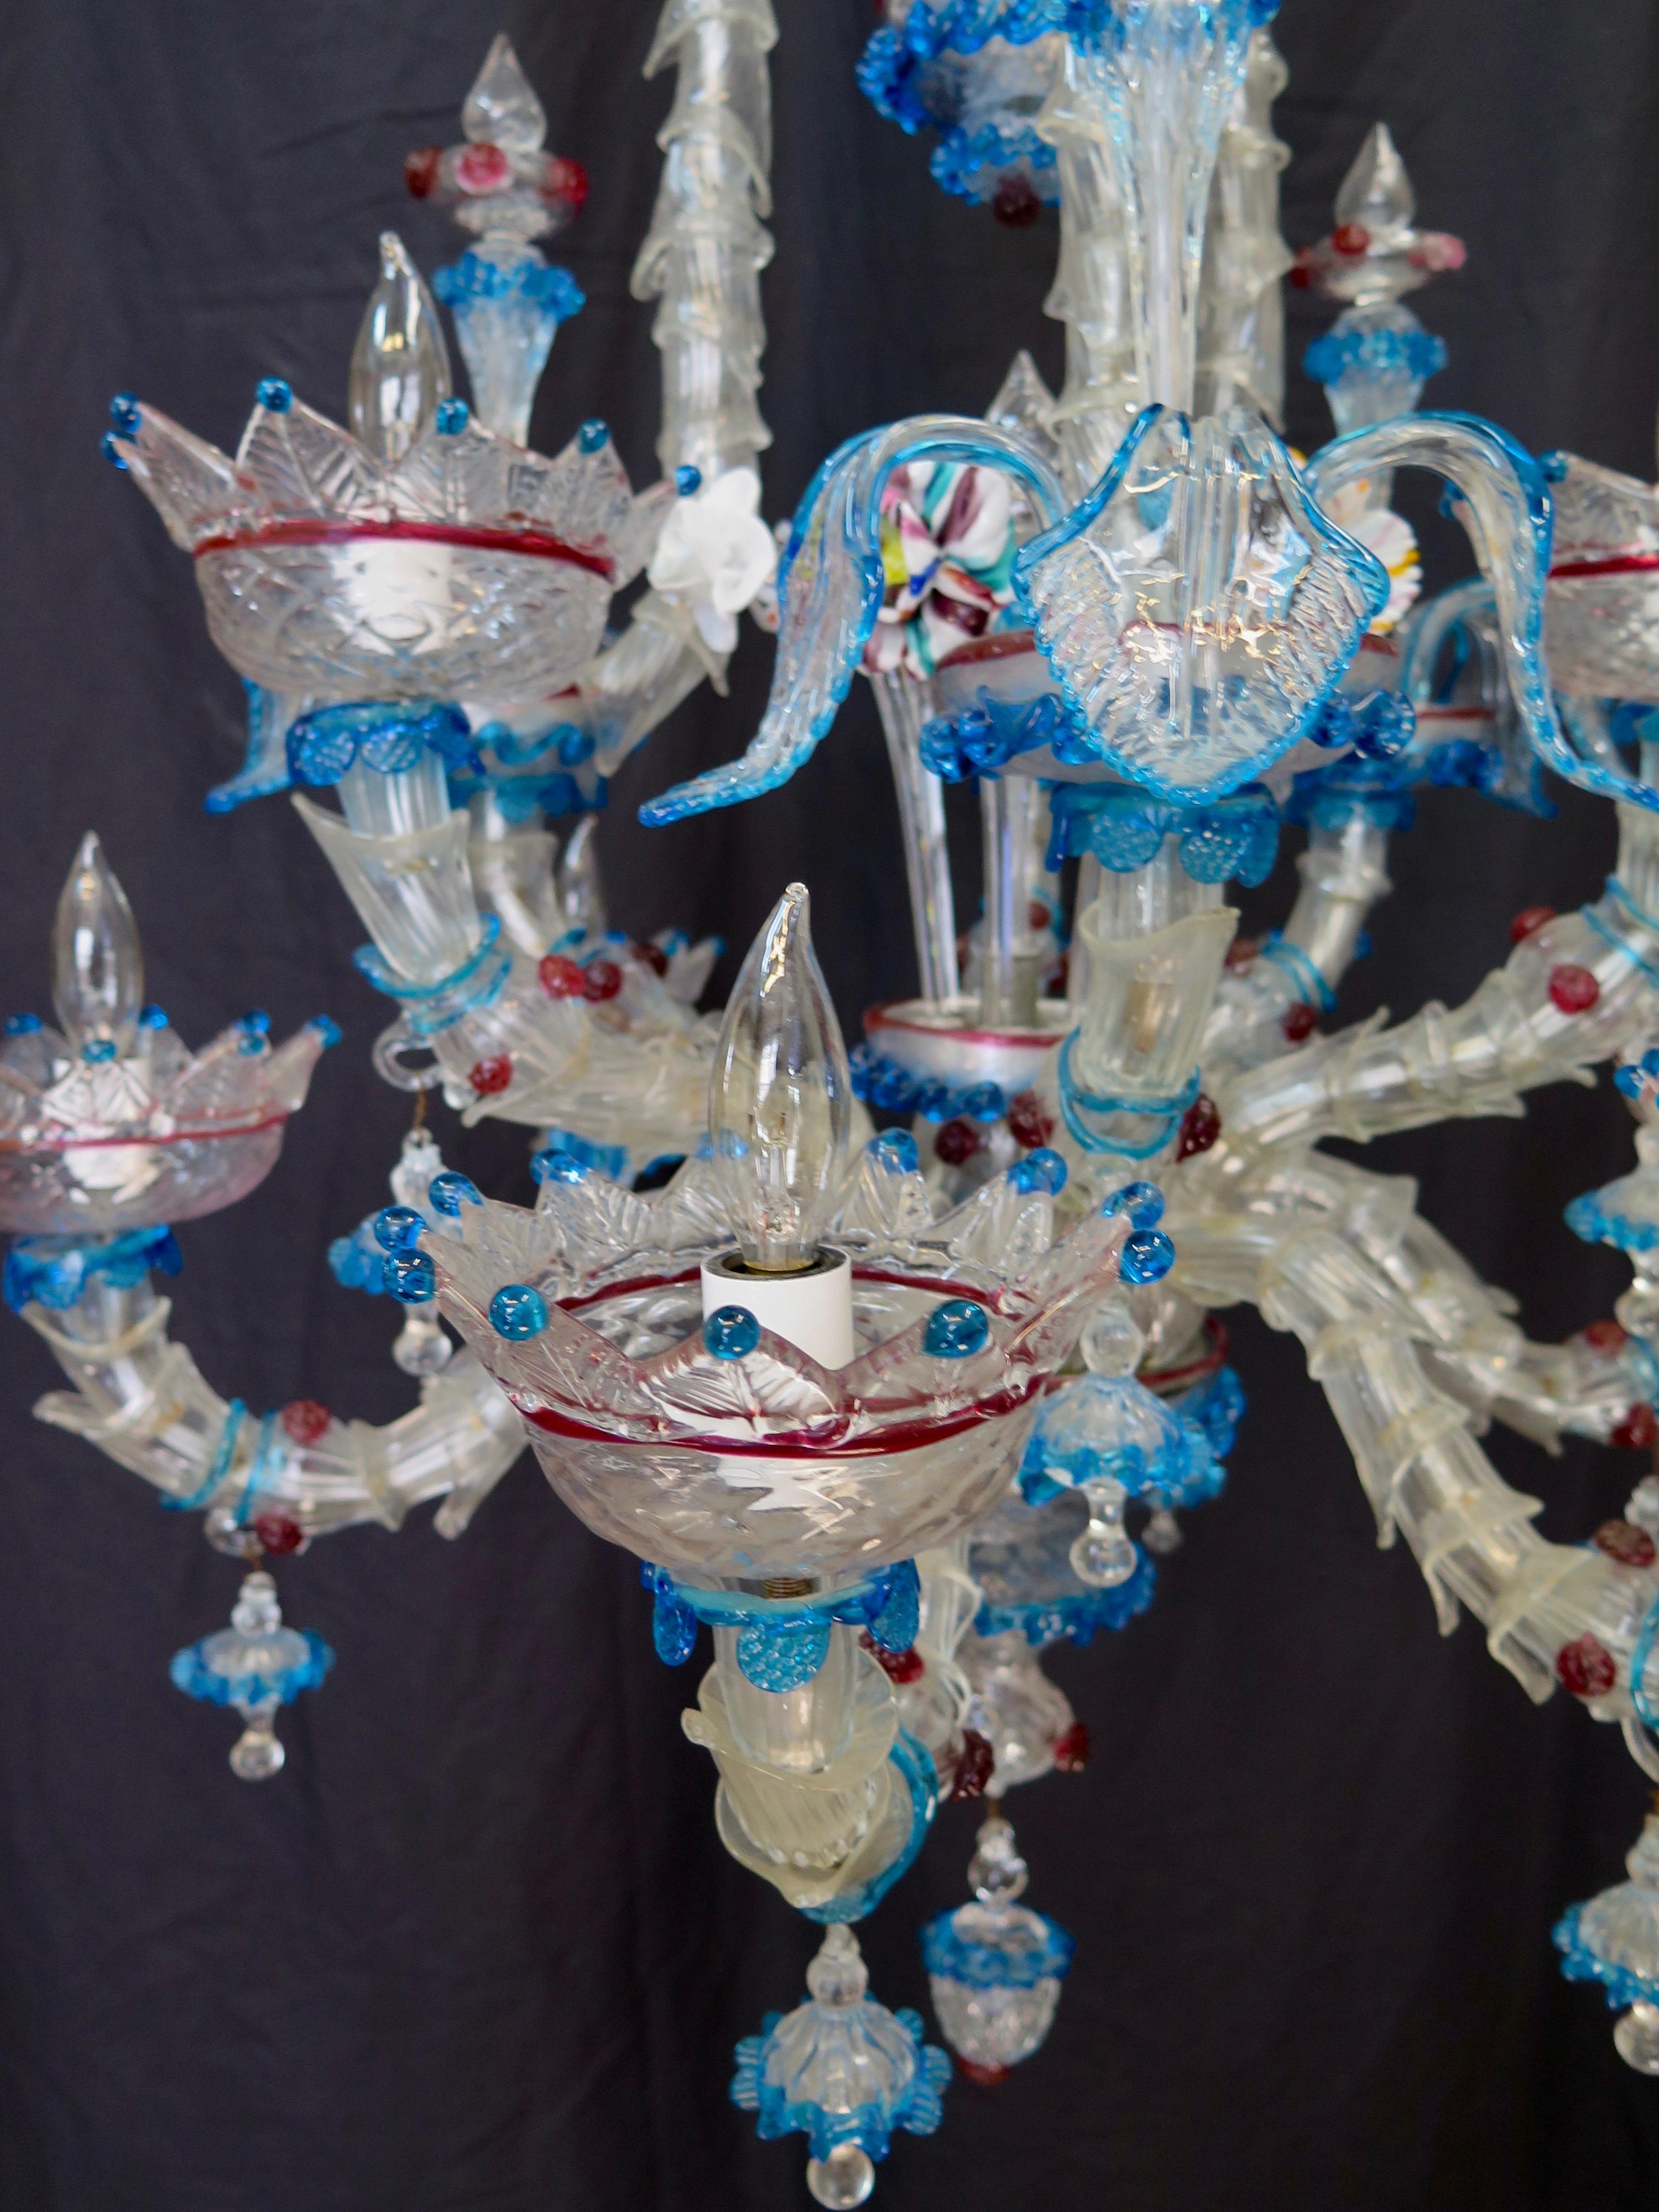 This elaborate midcentury Venetian glass chandelier is handmade by Murano. It is an exquisite double tier nine arm lighting fixture with hand blown embellishments of foliage accents and colorful flowers that accentuate its beauty. It will make a